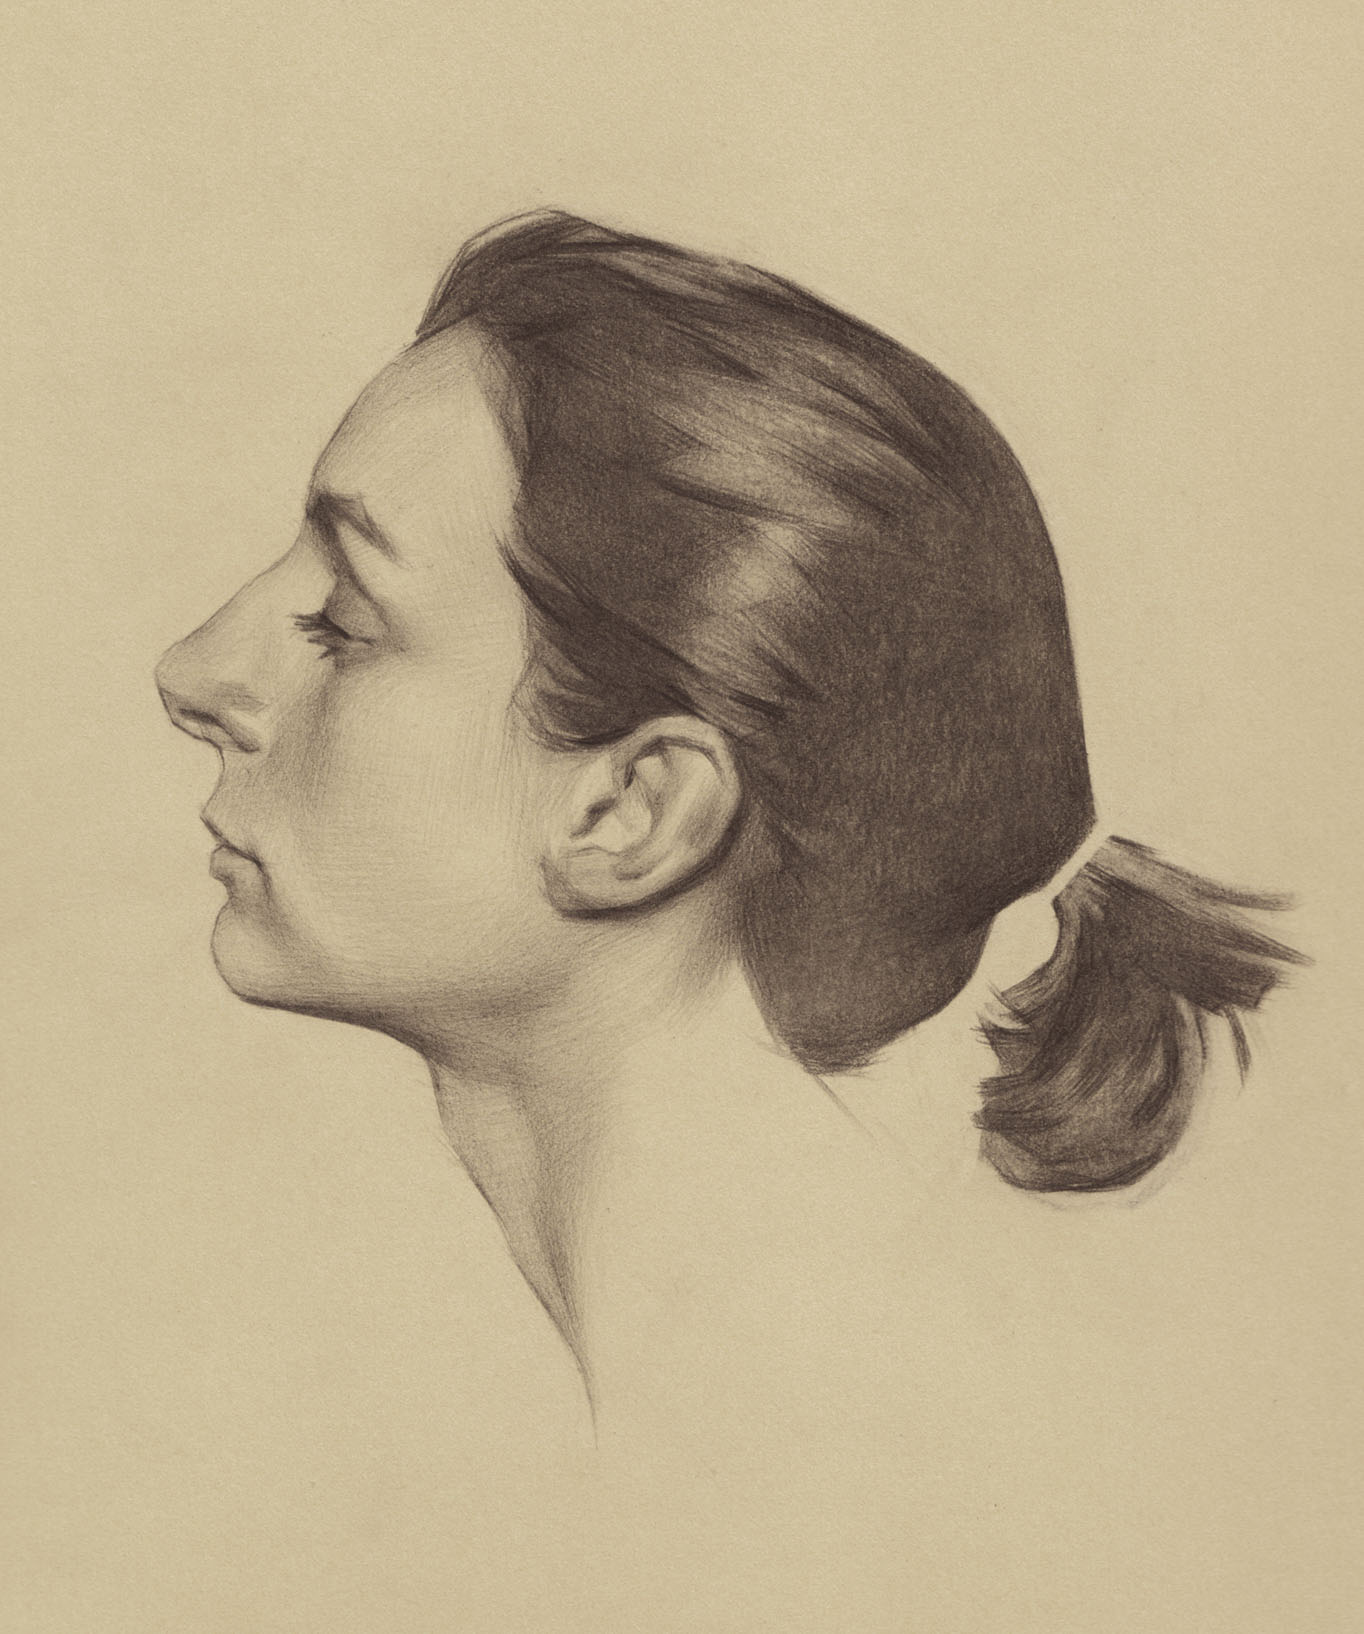 Andrew Ameral, Annie, Graphite on Stonehenge paper, 7 x 8 in. 2015